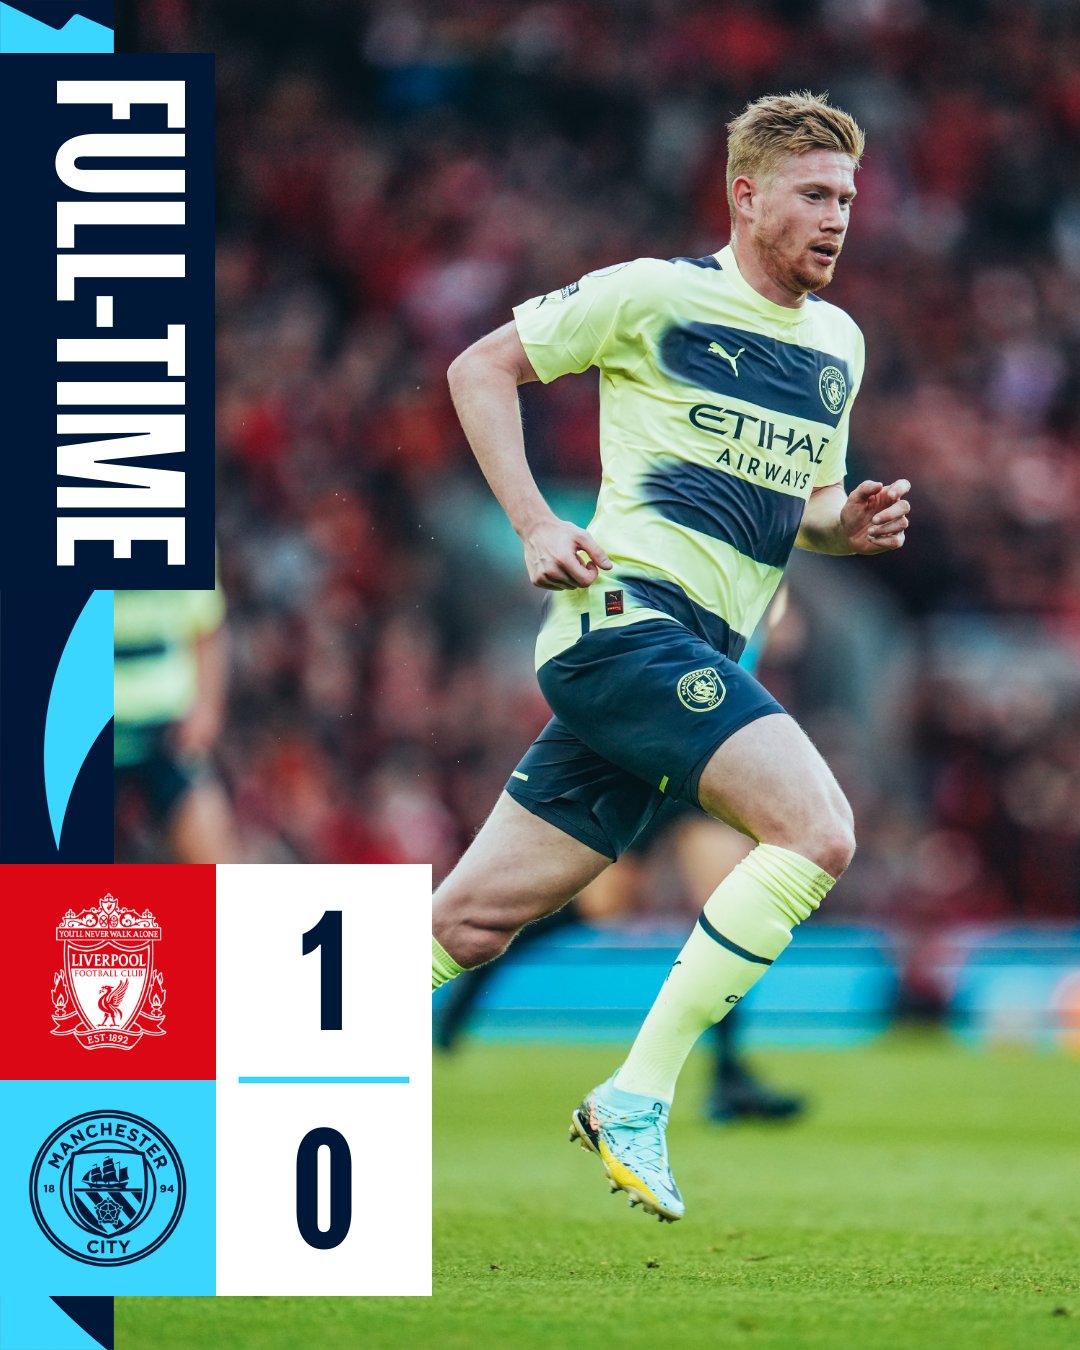 Manchester City on Twitter: "FULL-TIME | It ends defeat at Anfield. 🔴 1-0 🐝 #ManCity https://t.co/N1PhSzy6X1" / Twitter